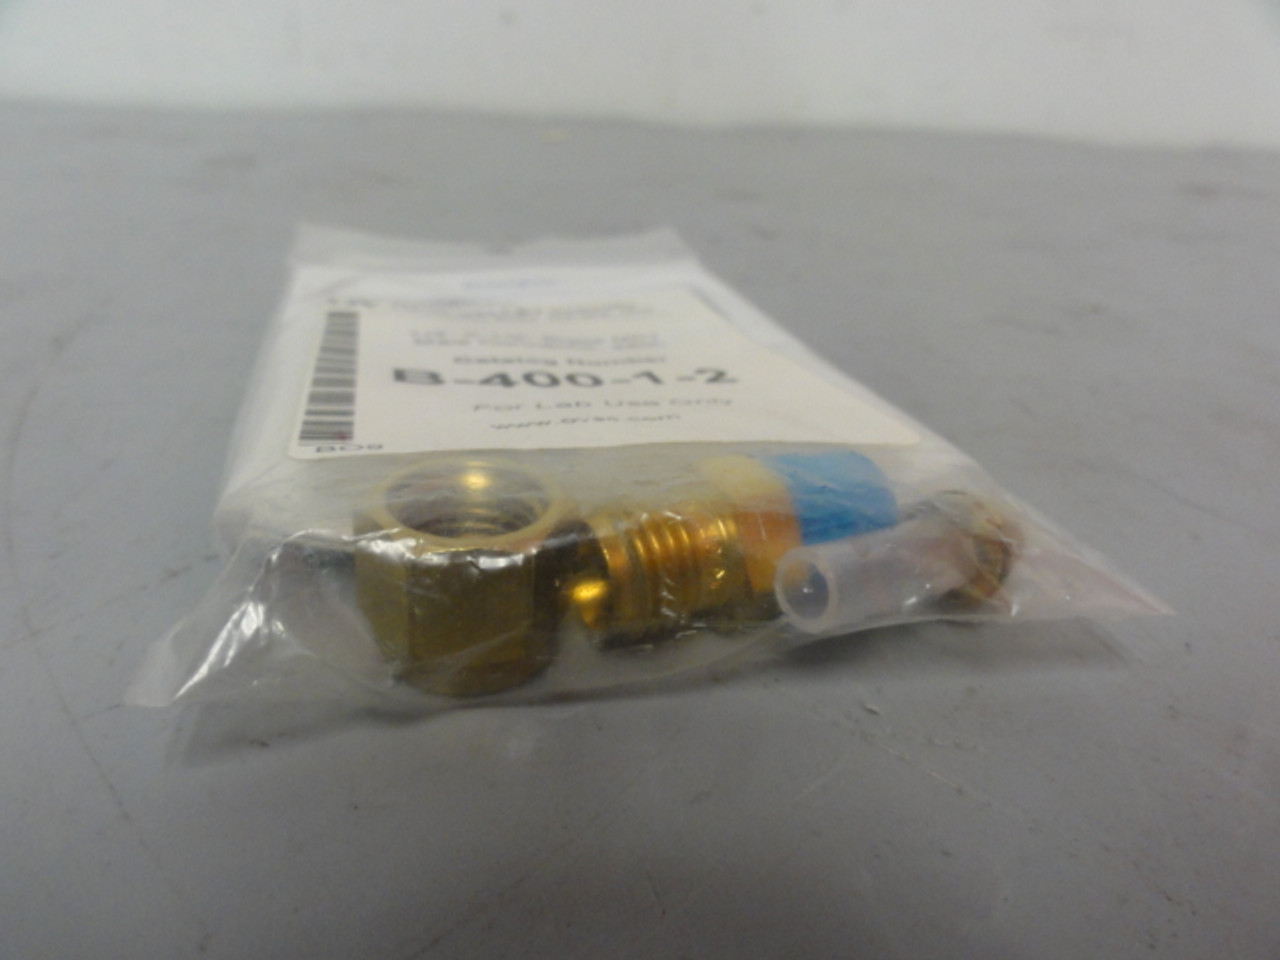 Ohio Valley Specialty B-400-1-2 Brass MPT Male Connector- New (Unopened) Lot of 2